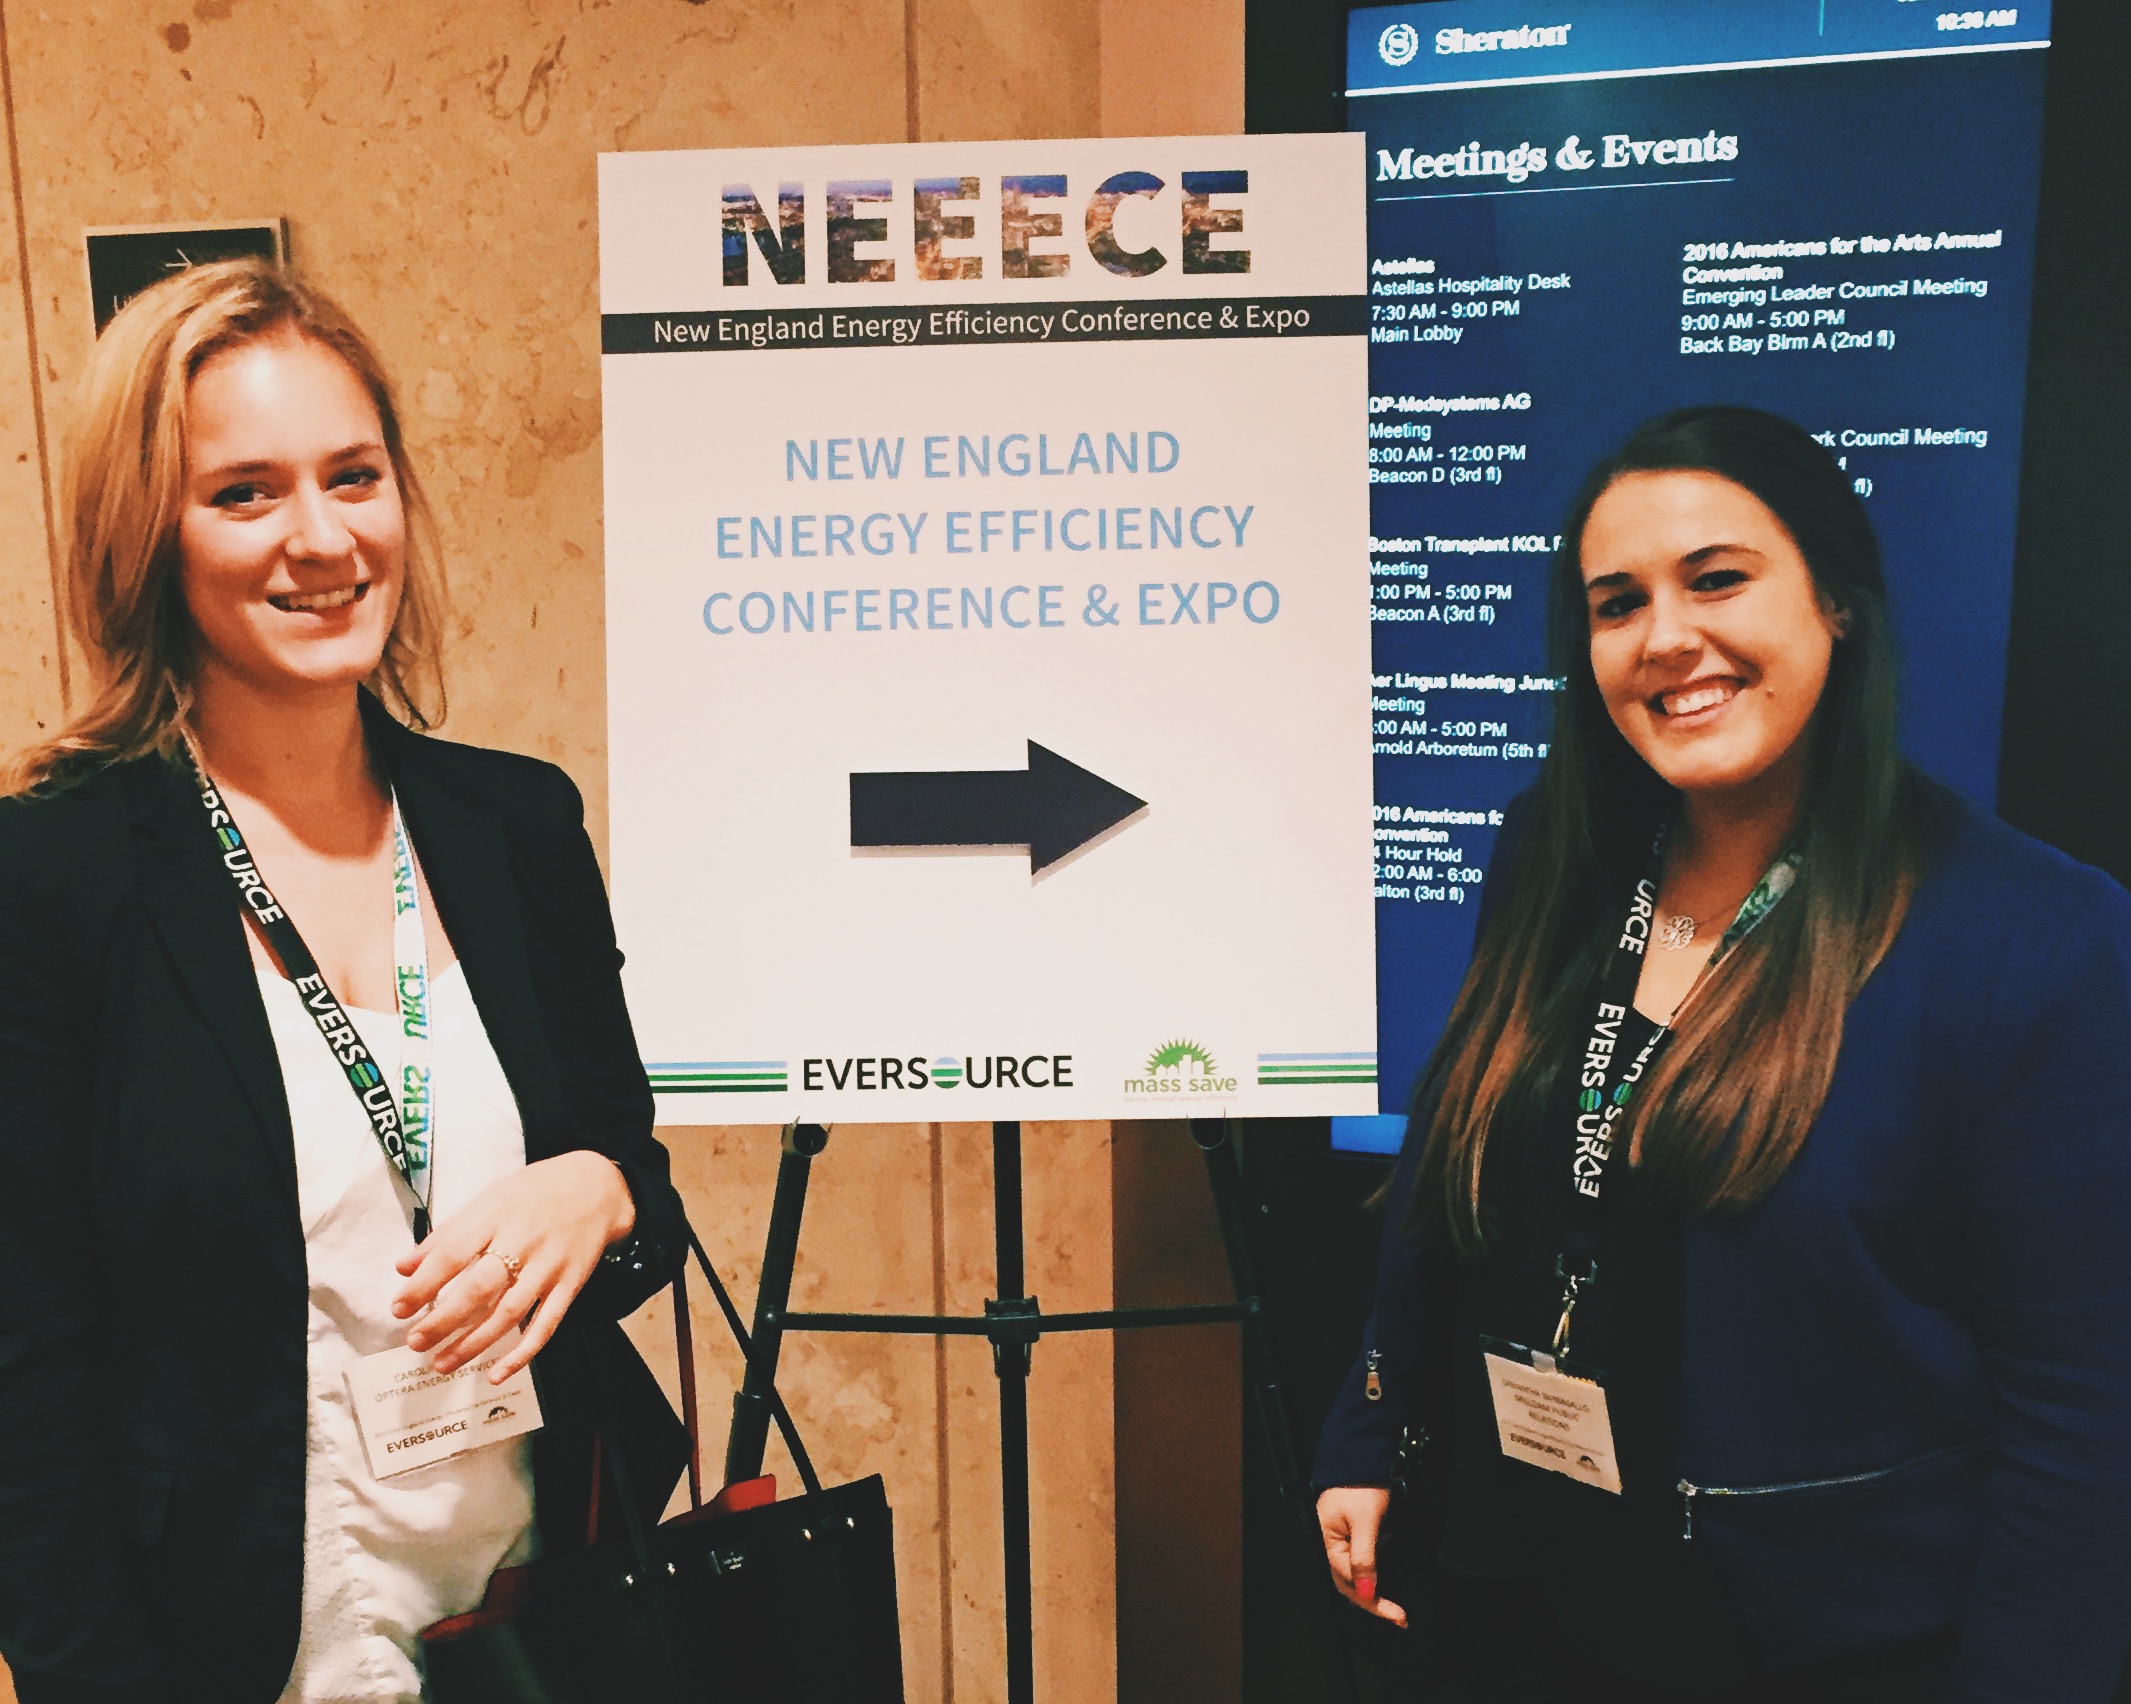 Caroline and Samantha excited to be at NEEECE 2016!